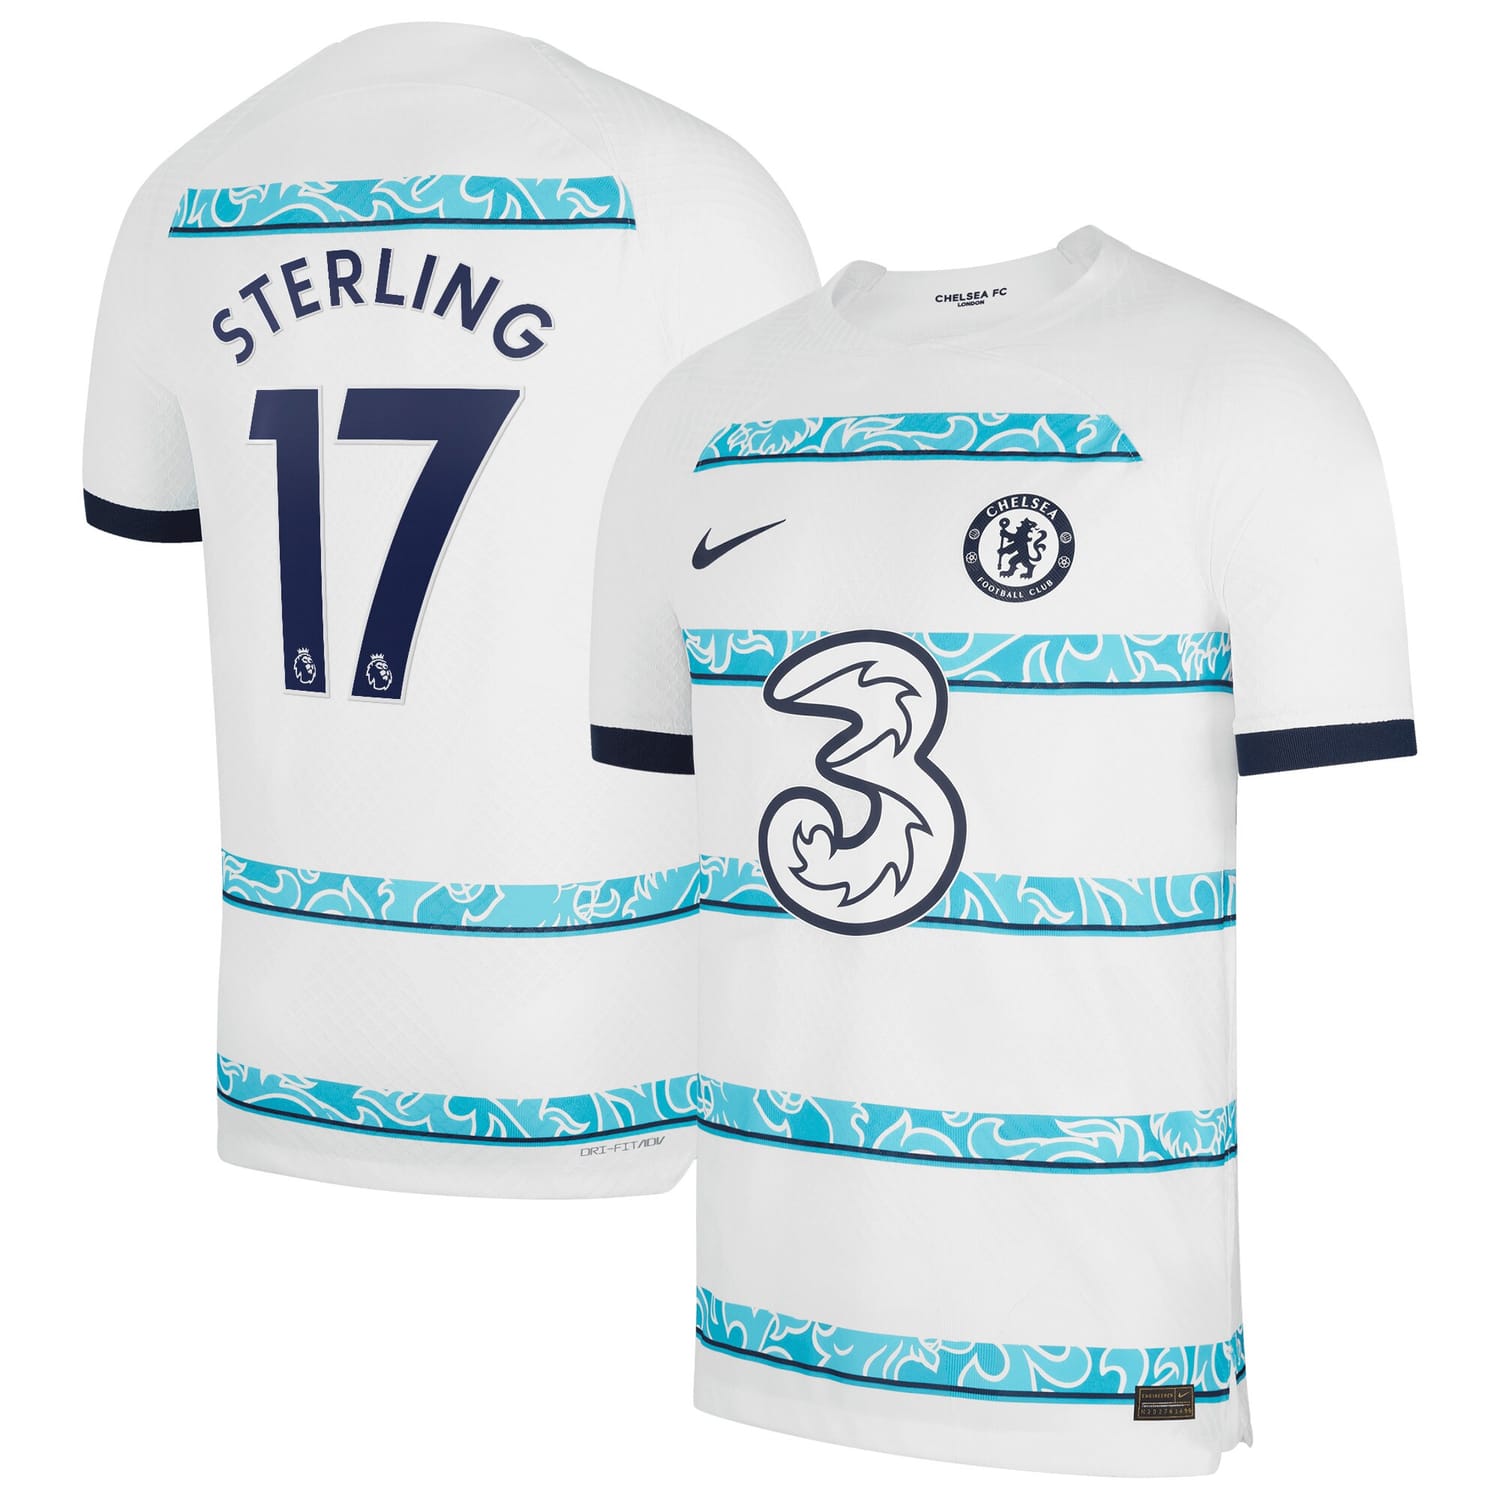 Premier League Chelsea Away Authentic Jersey Shirt 2022-23 player Raheem Sterling 17 printing for Men